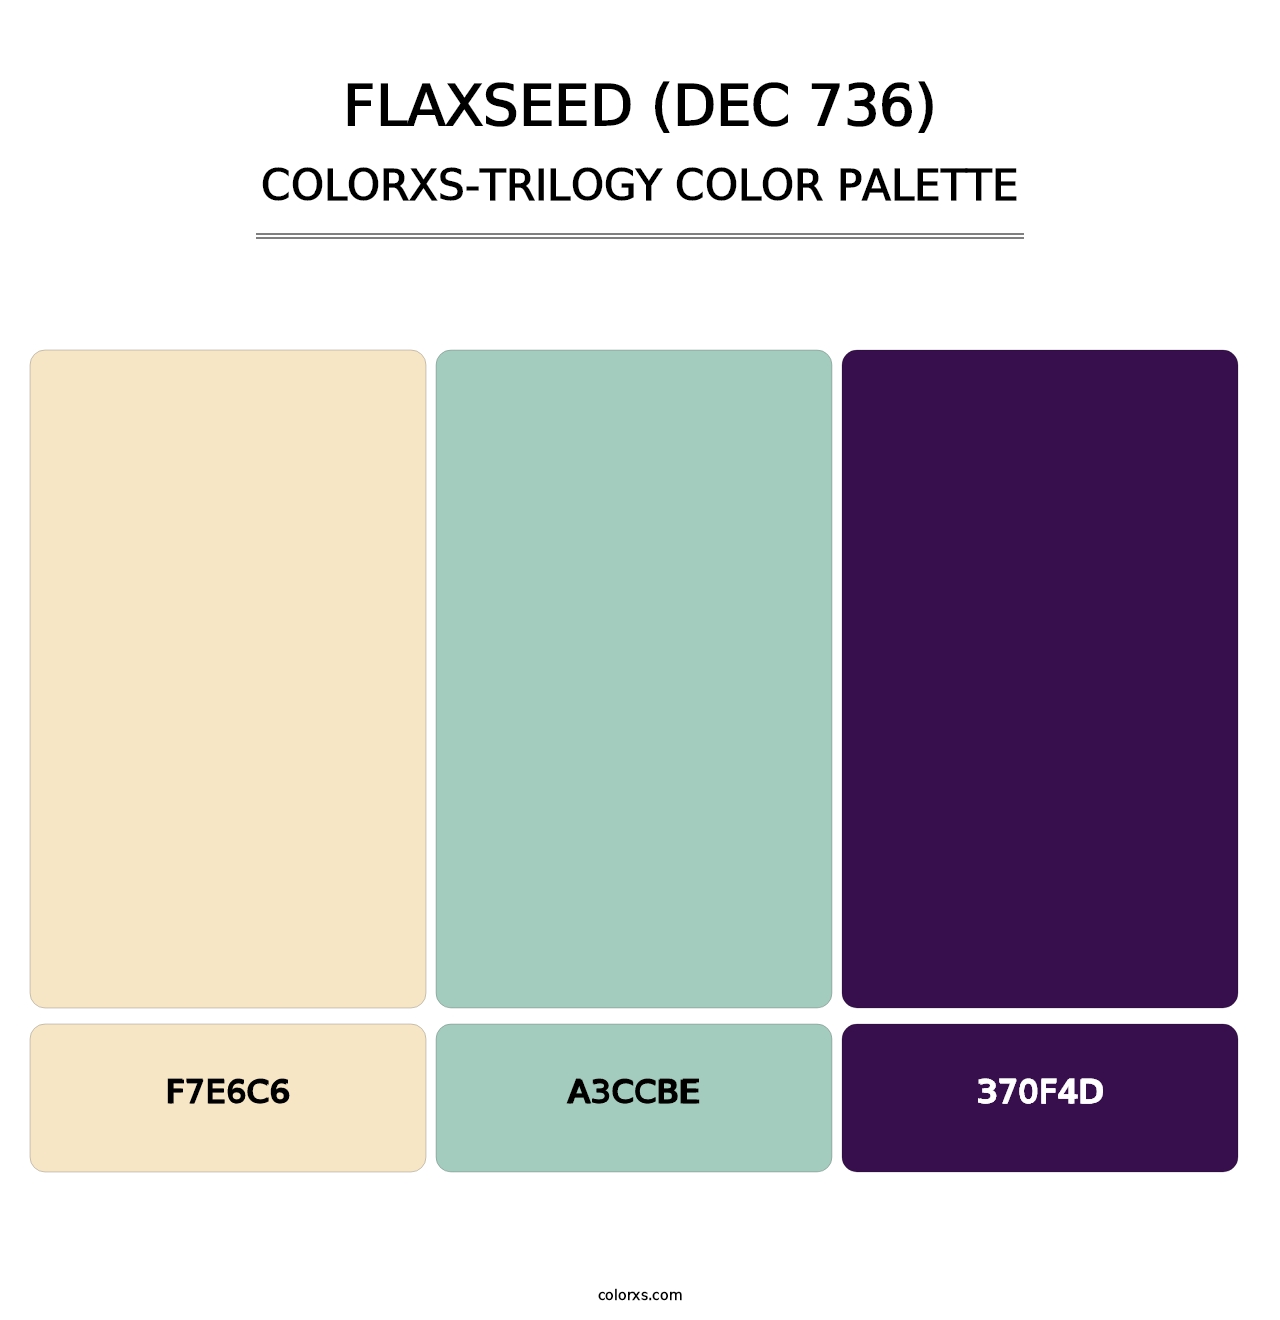 Flaxseed (DEC 736) - Colorxs Trilogy Palette